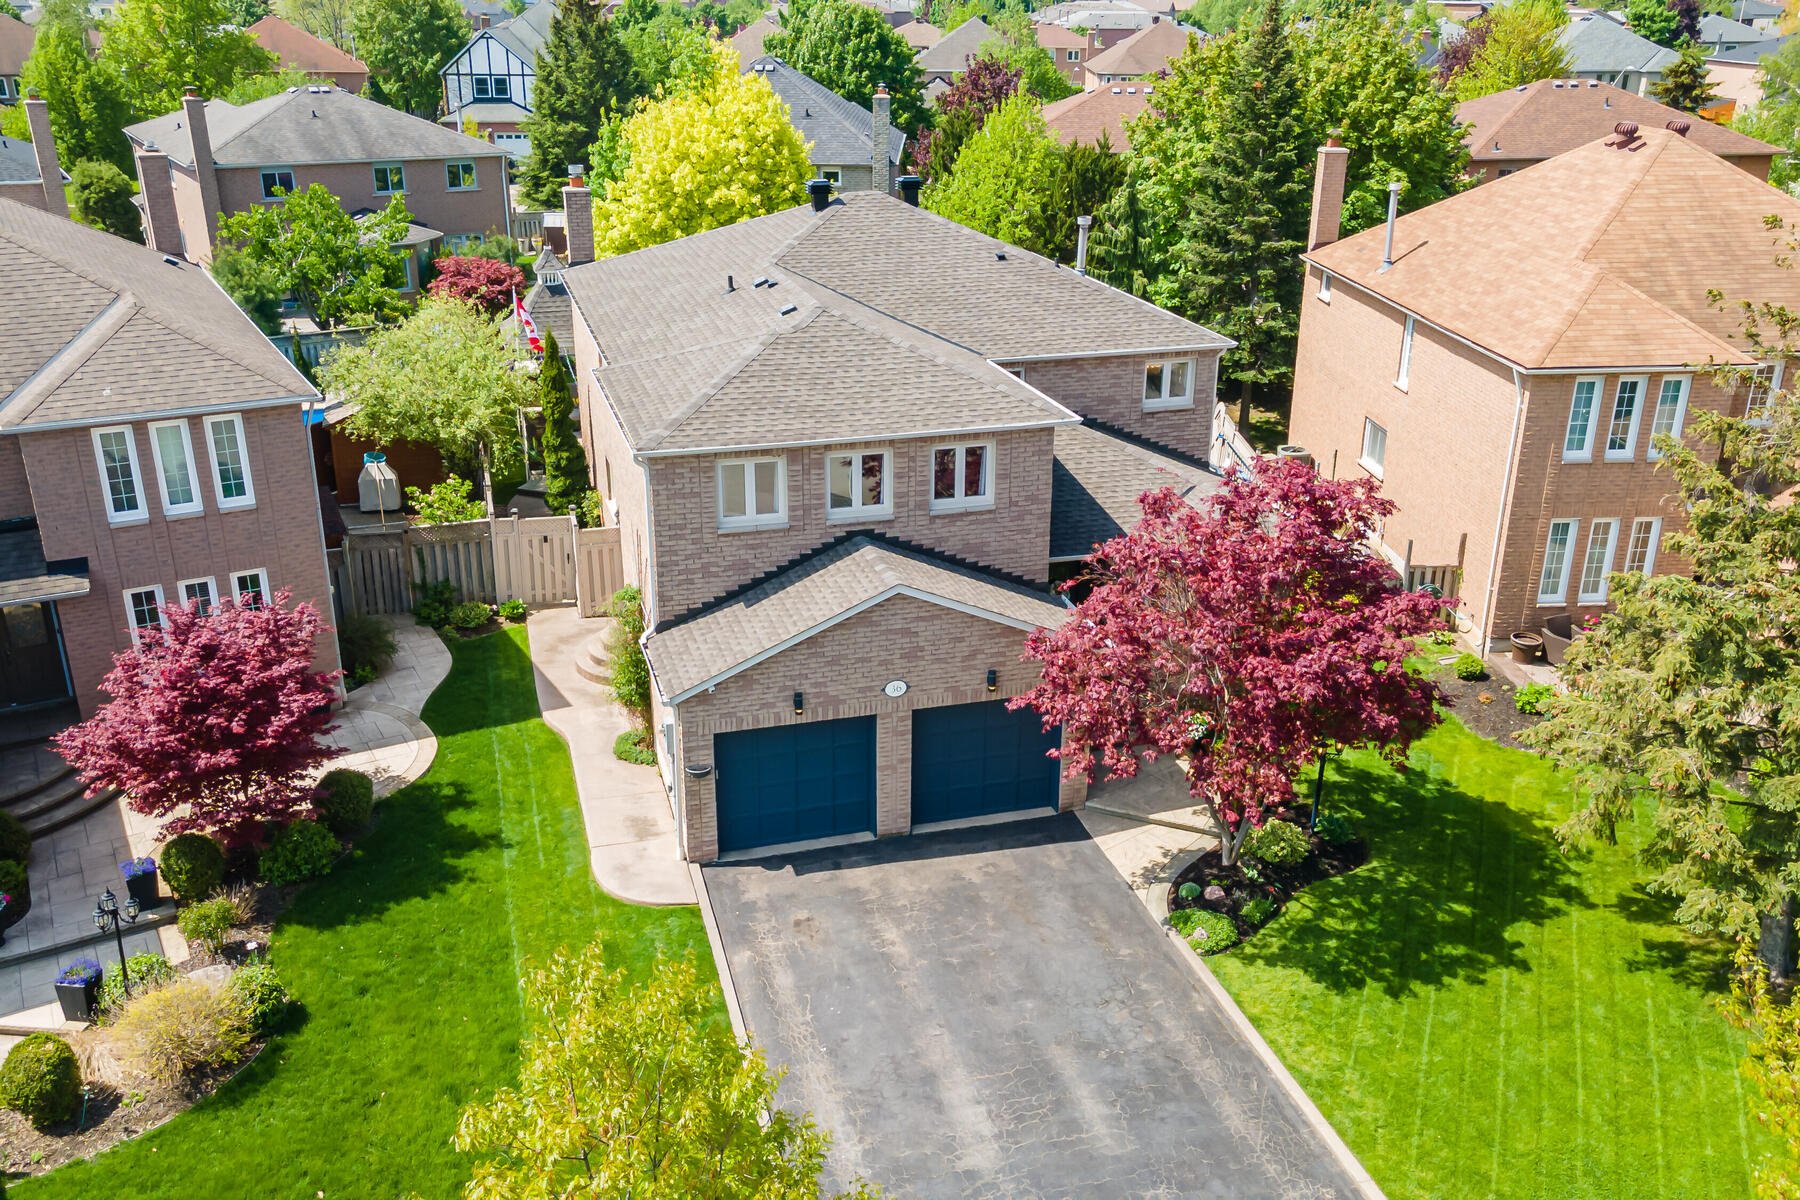 36 Treanor Cres Georgetown ON L7G 5H9 Canada-007-017-Aerial-MLS_Size.jpg